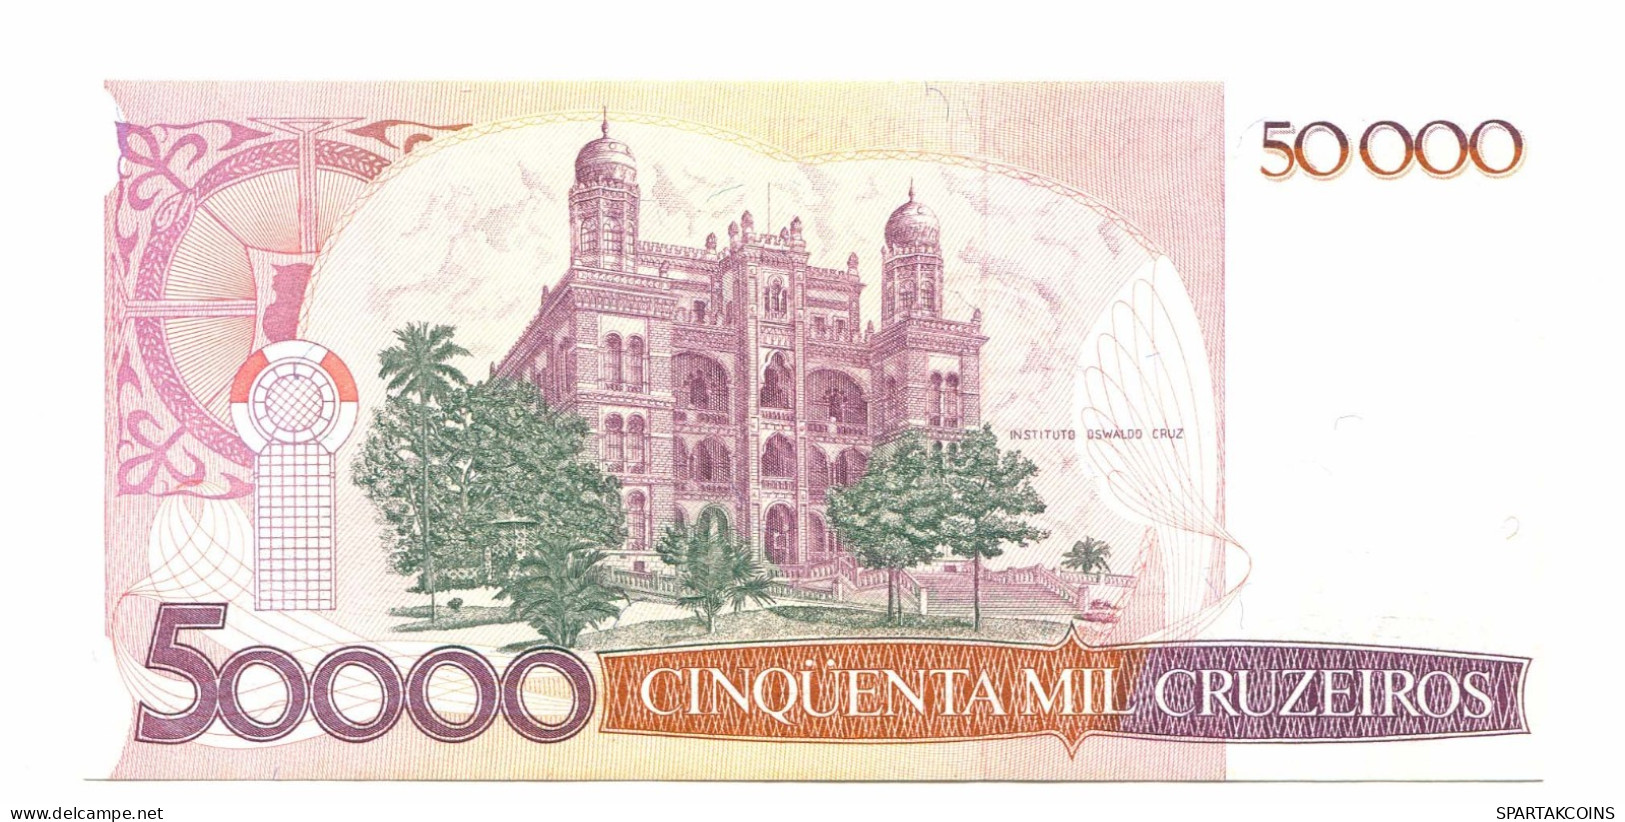 BRAZIL REPLACEMENT NOTE Star*A 50 CRUZADOS ON 50000 CRUZEIROS 1986 UNC P10994.6 - [11] Lokale Uitgaven